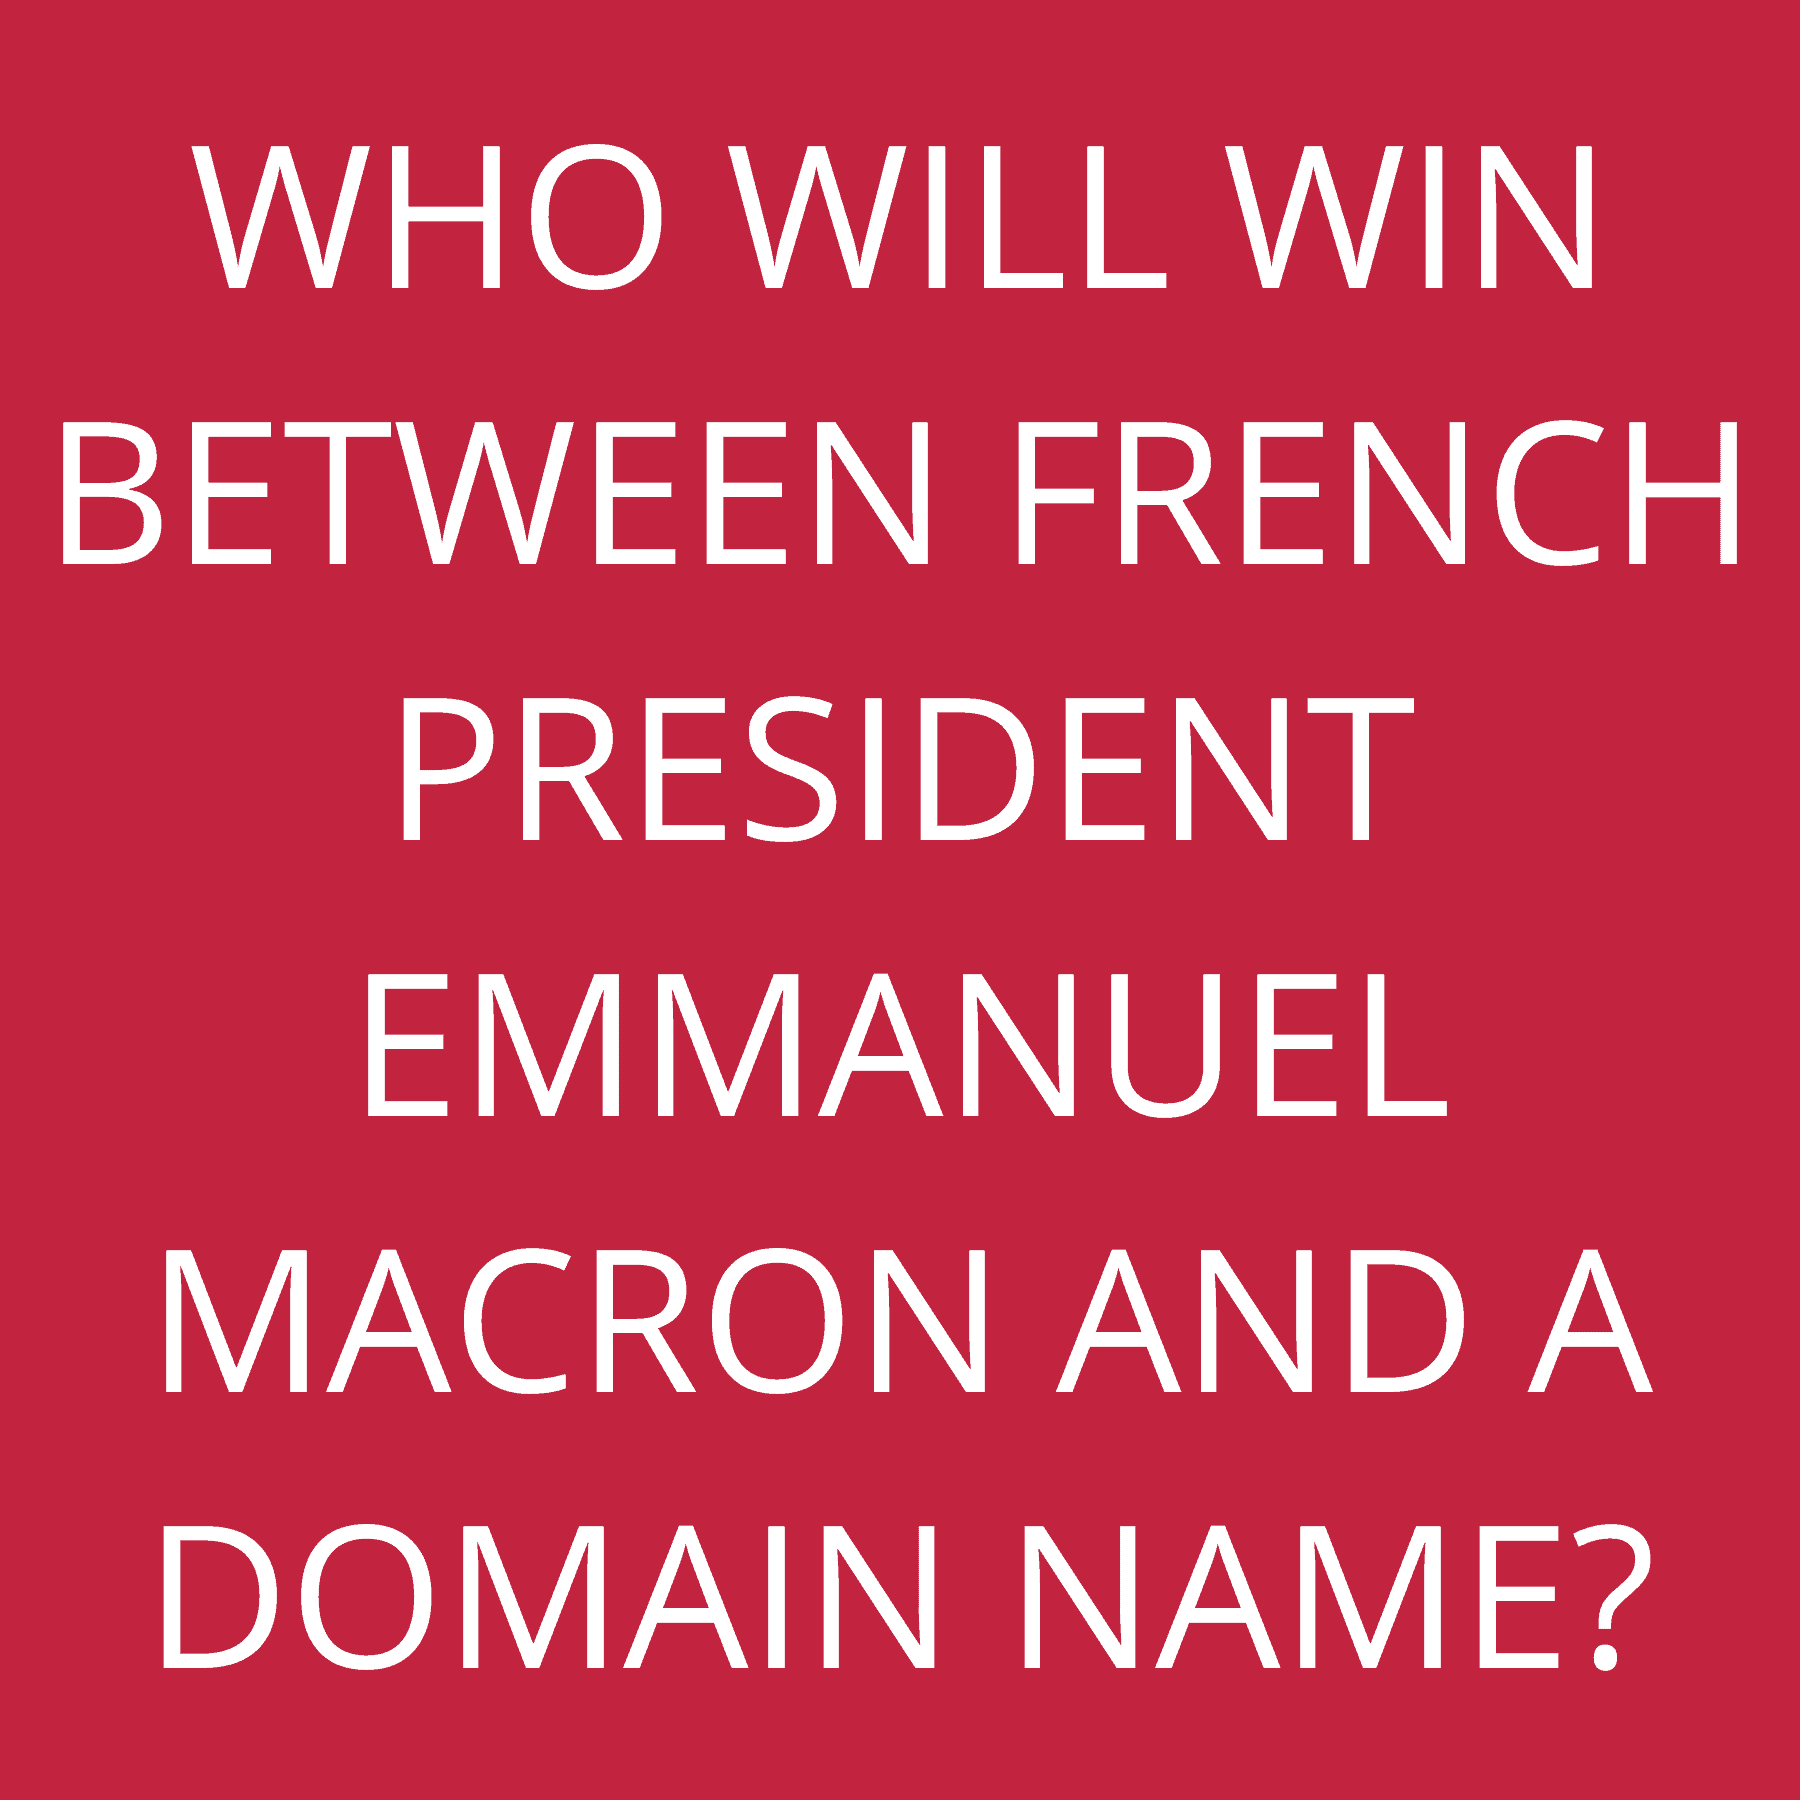 Who will win between French President Emmanuel Macron and a domain name?